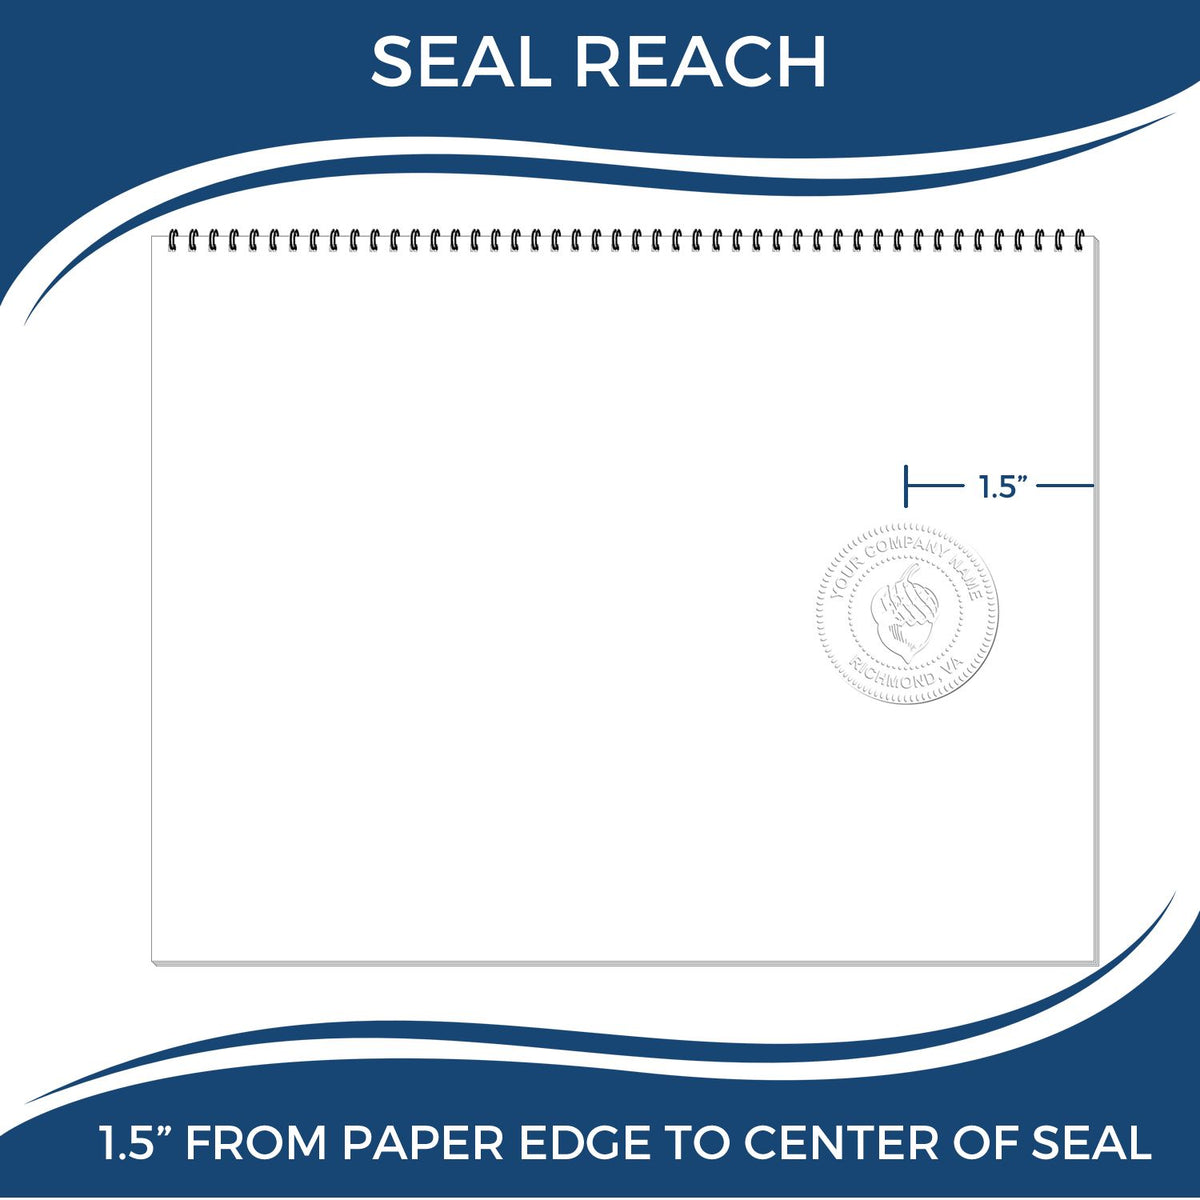 An infographic showing the seal reach which is represented by a ruler and a miniature seal image of the New Hampshire Desk Architect Embossing Seal